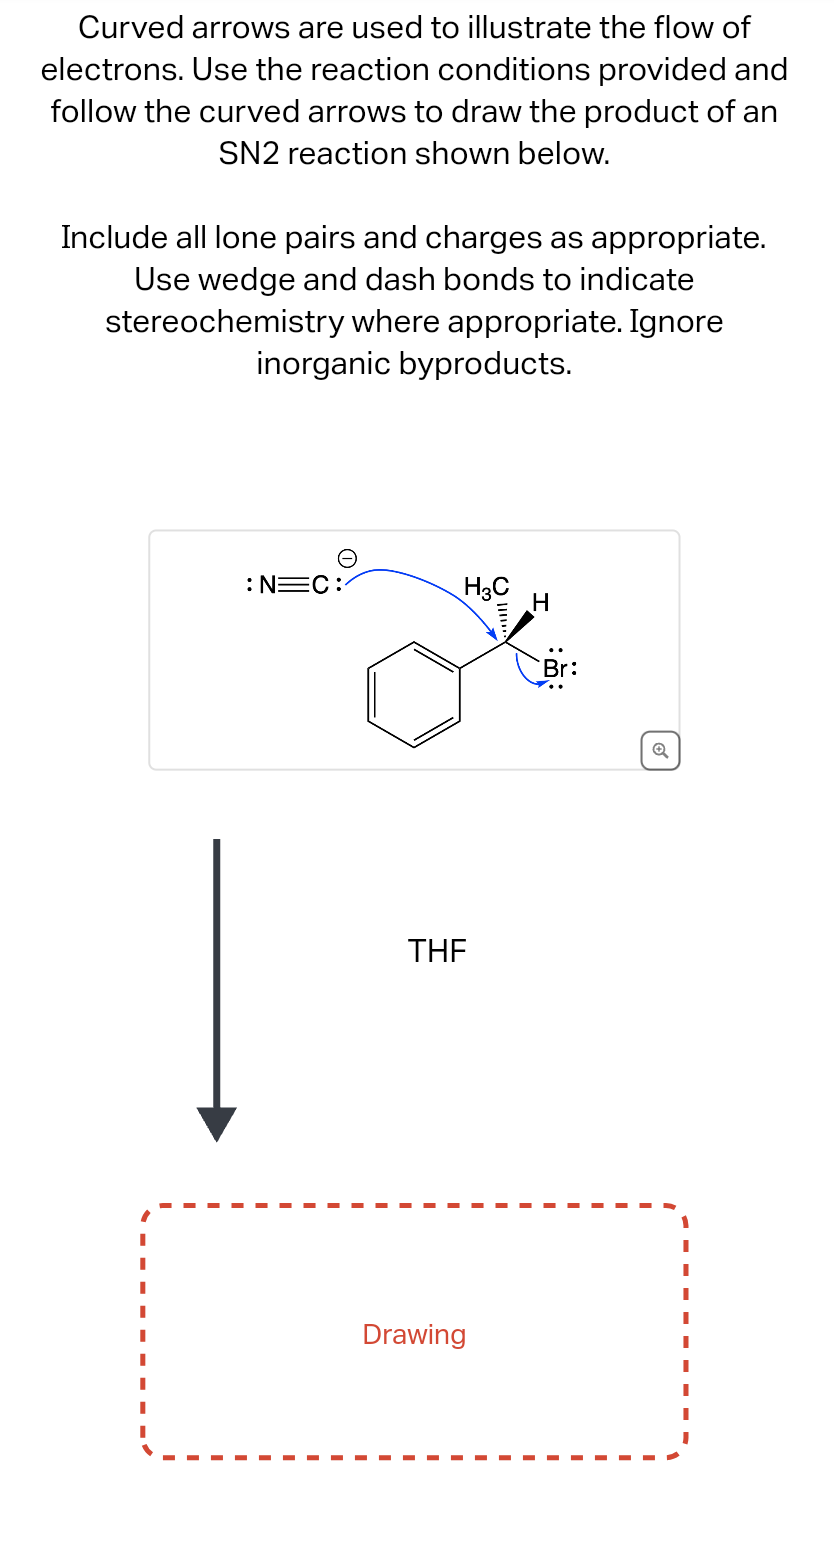 Curved arrows are used to illustrate the flow of
electrons. Use the reaction conditions provided and
follow the curved arrows to draw the product of an
SN2 reaction shown below.
Include all lone pairs and charges as appropriate.
Use wedge and dash bonds to indicate
stereochemistry where appropriate. Ignore
inorganic byproducts.
:N=C:
H3C
THE
Drawing
H
Br:
Q
I
I